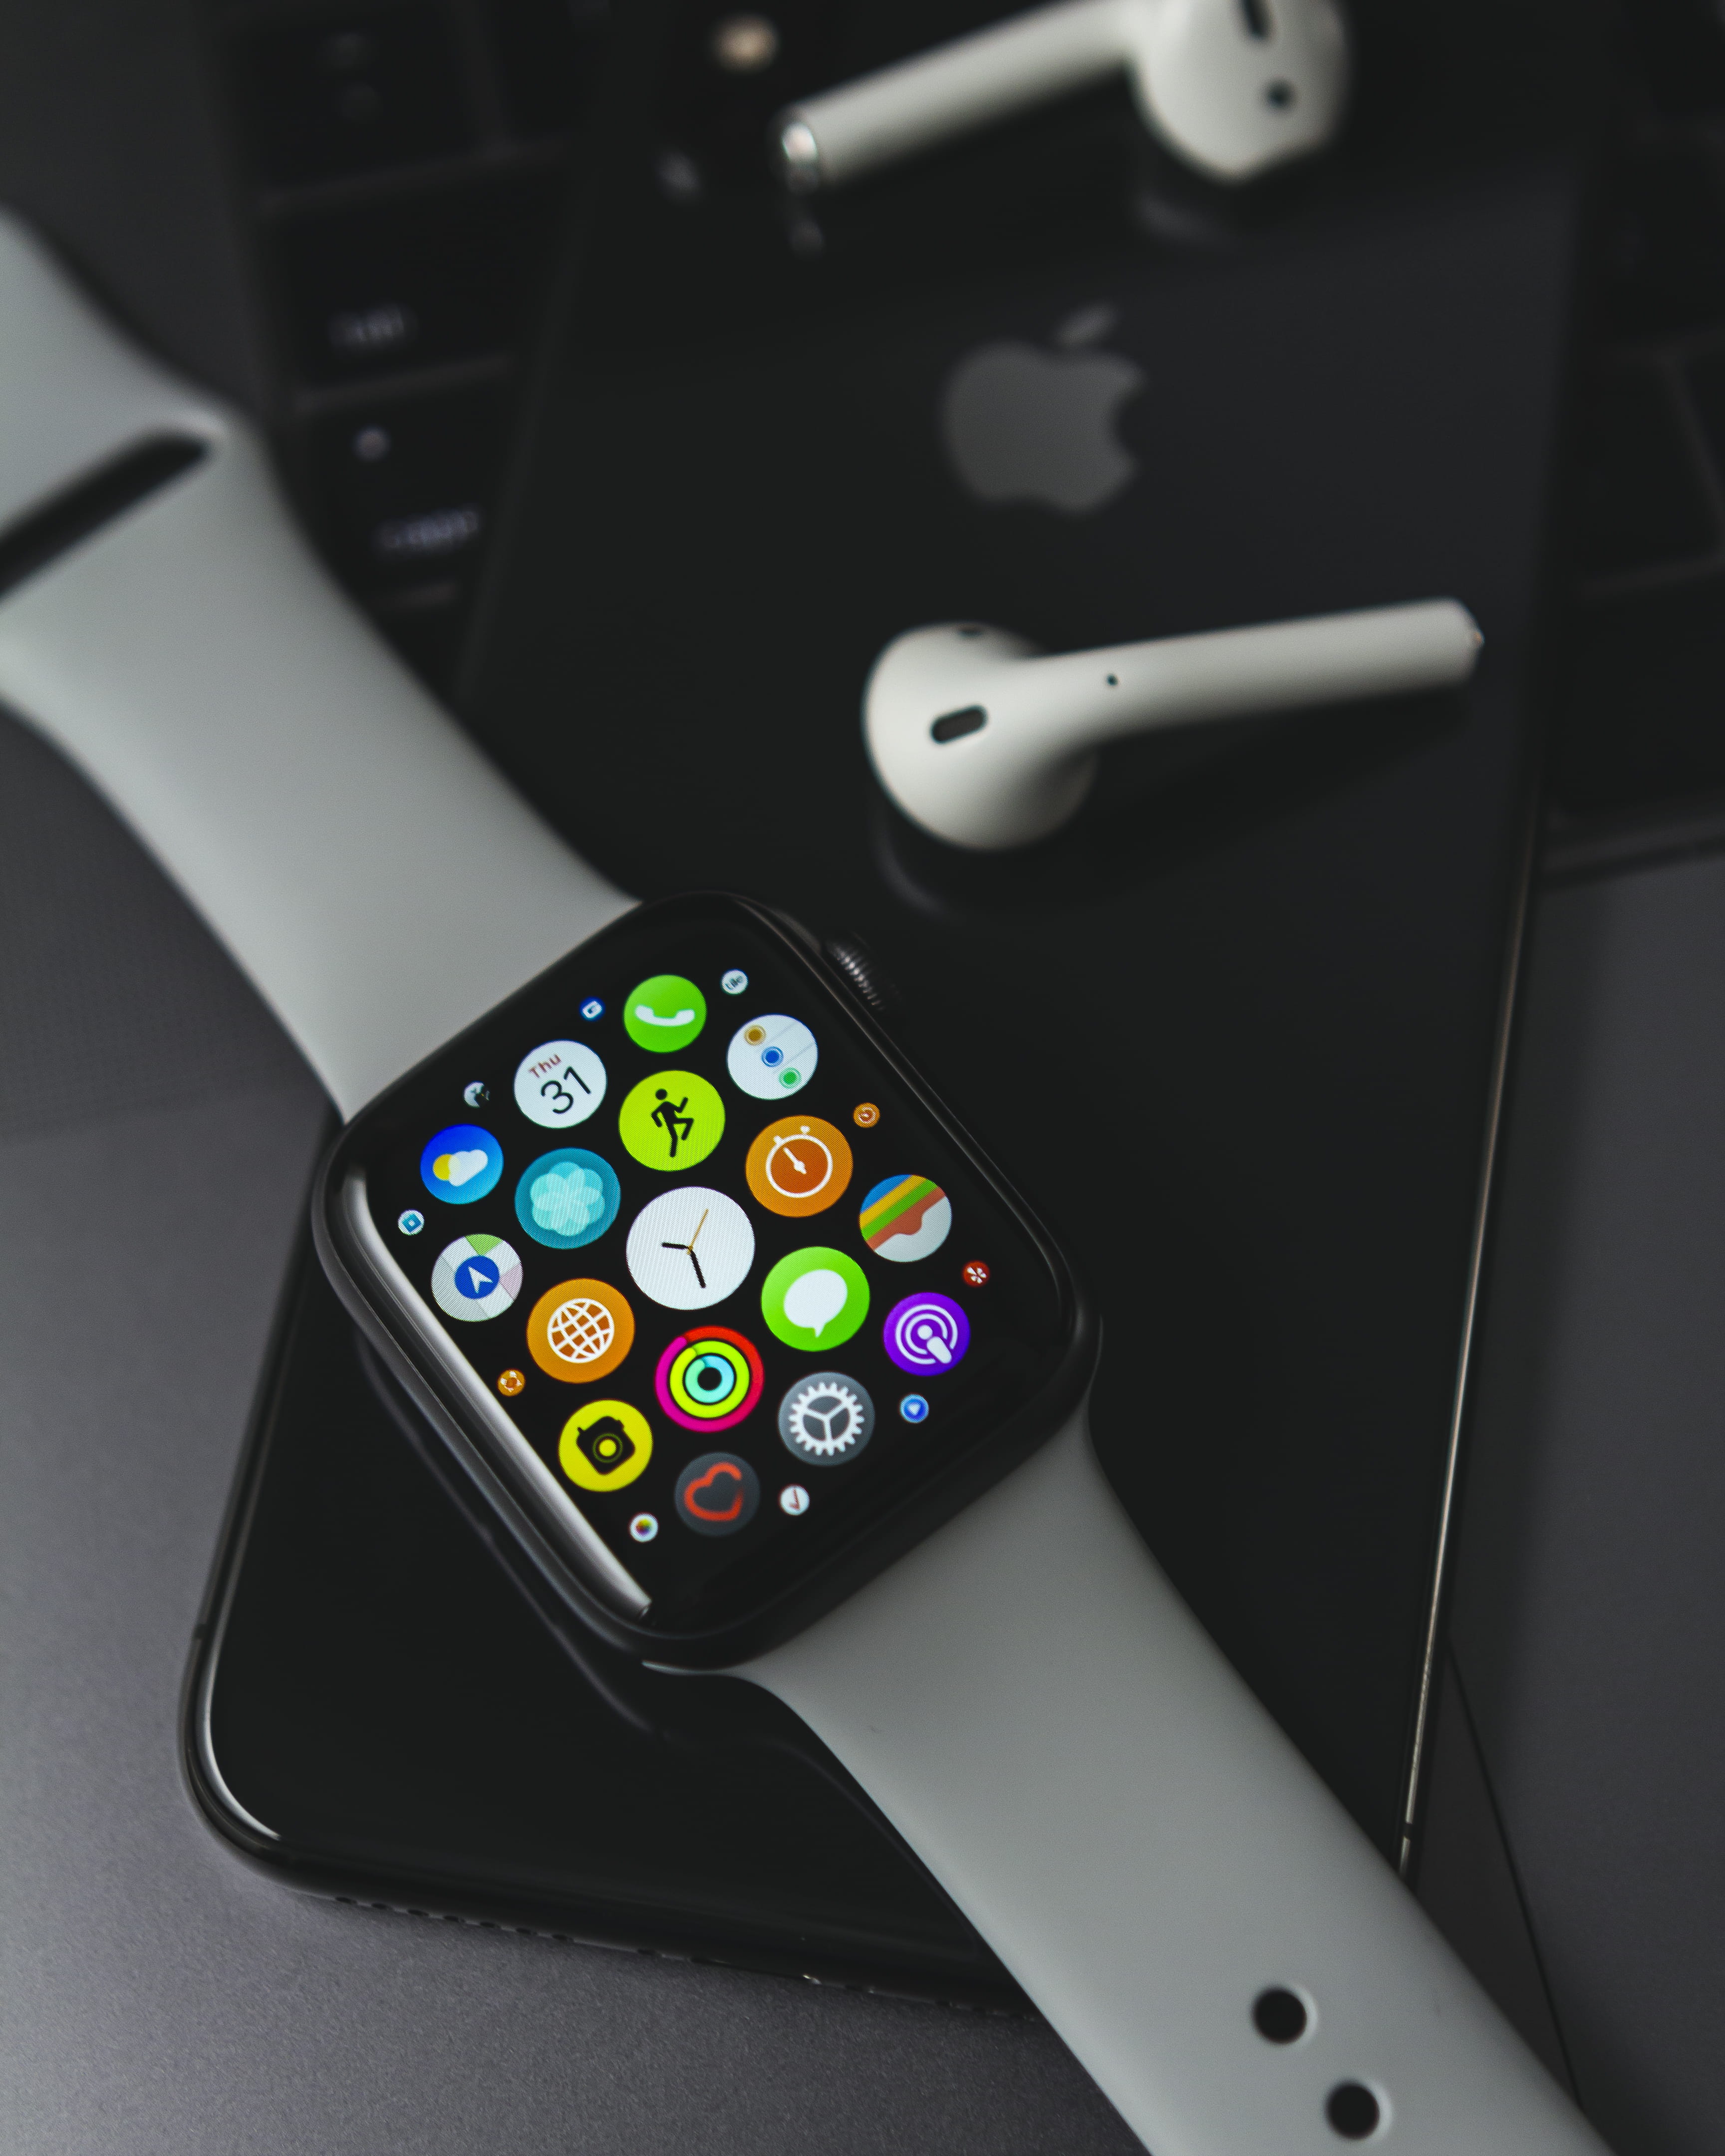 Apple Watch on jet black iPhone 7, close-up, indoors, multi colored